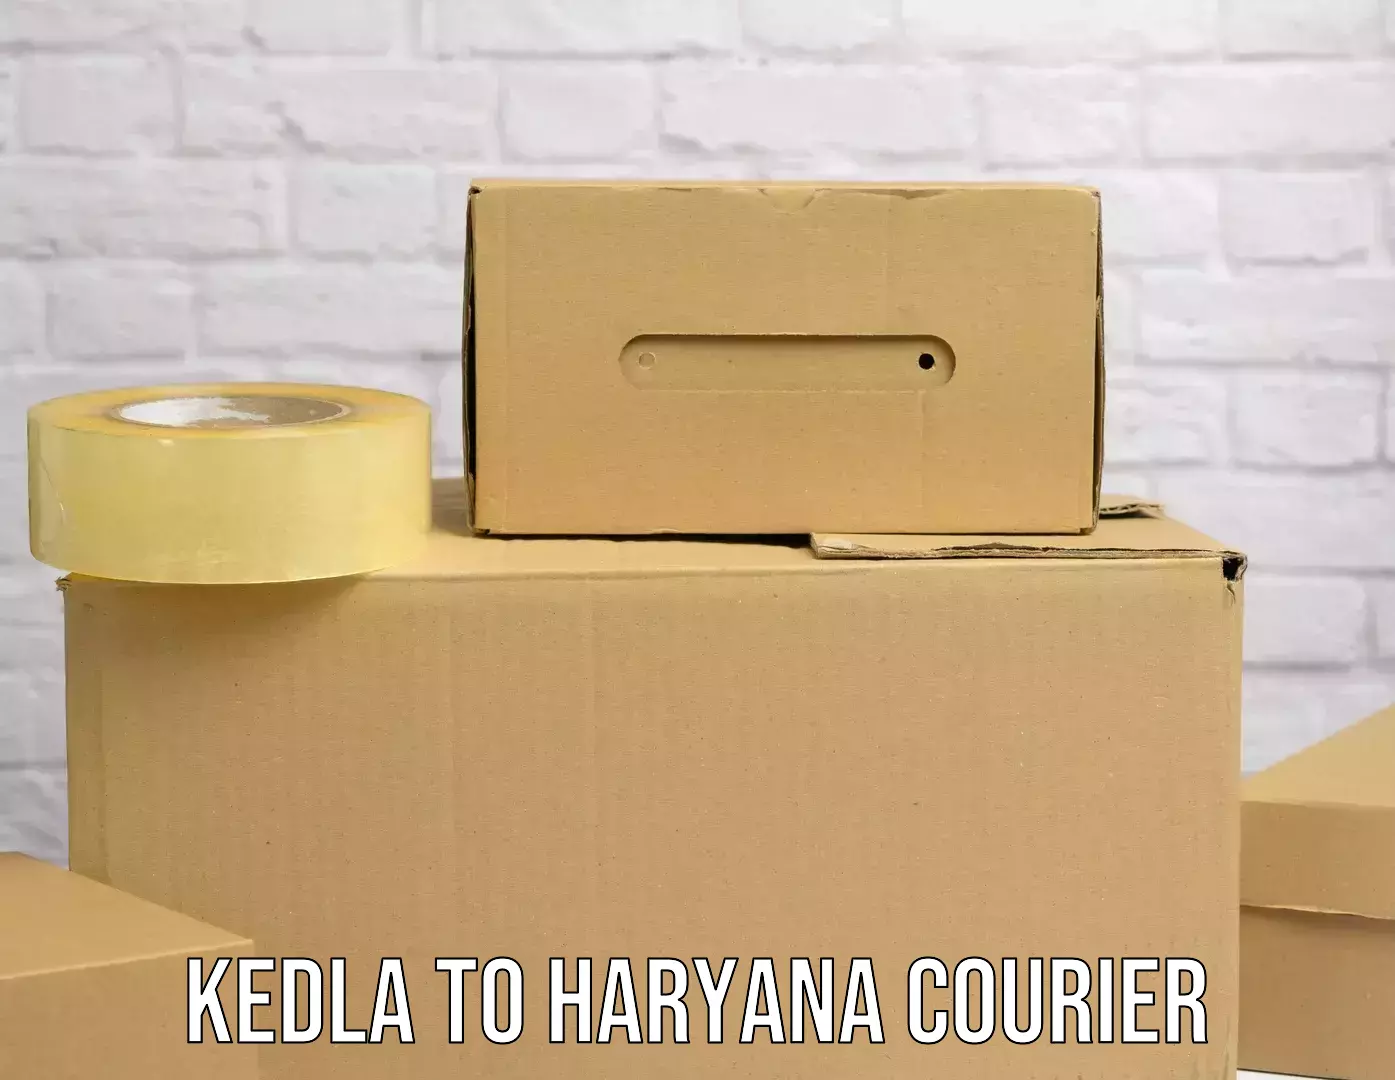 Easy access courier services Kedla to Pinjore